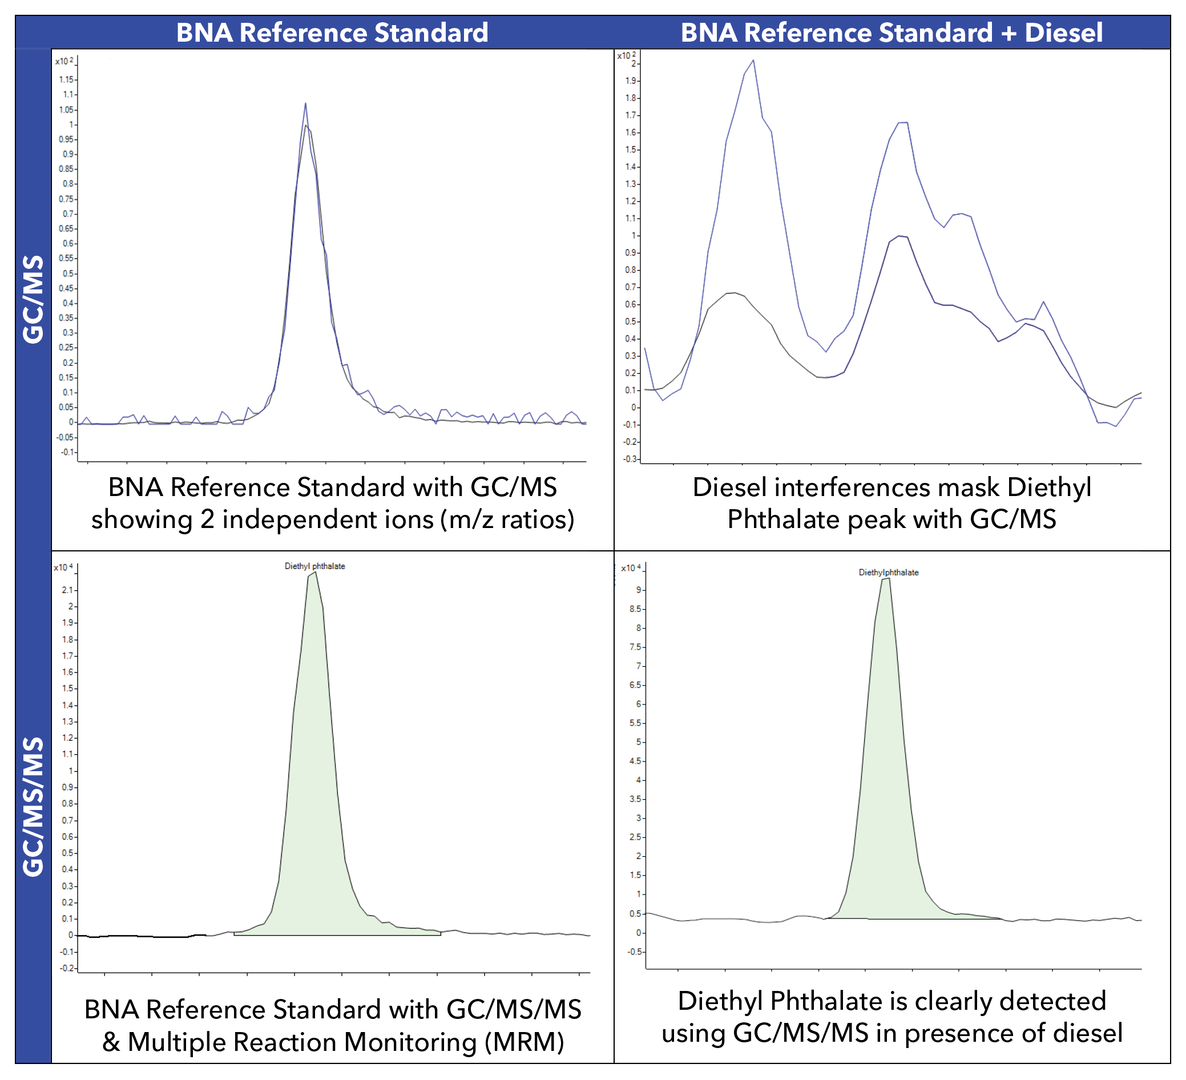 Figure 1.  Interference Effects on GC/MS vs GC/MS/MS